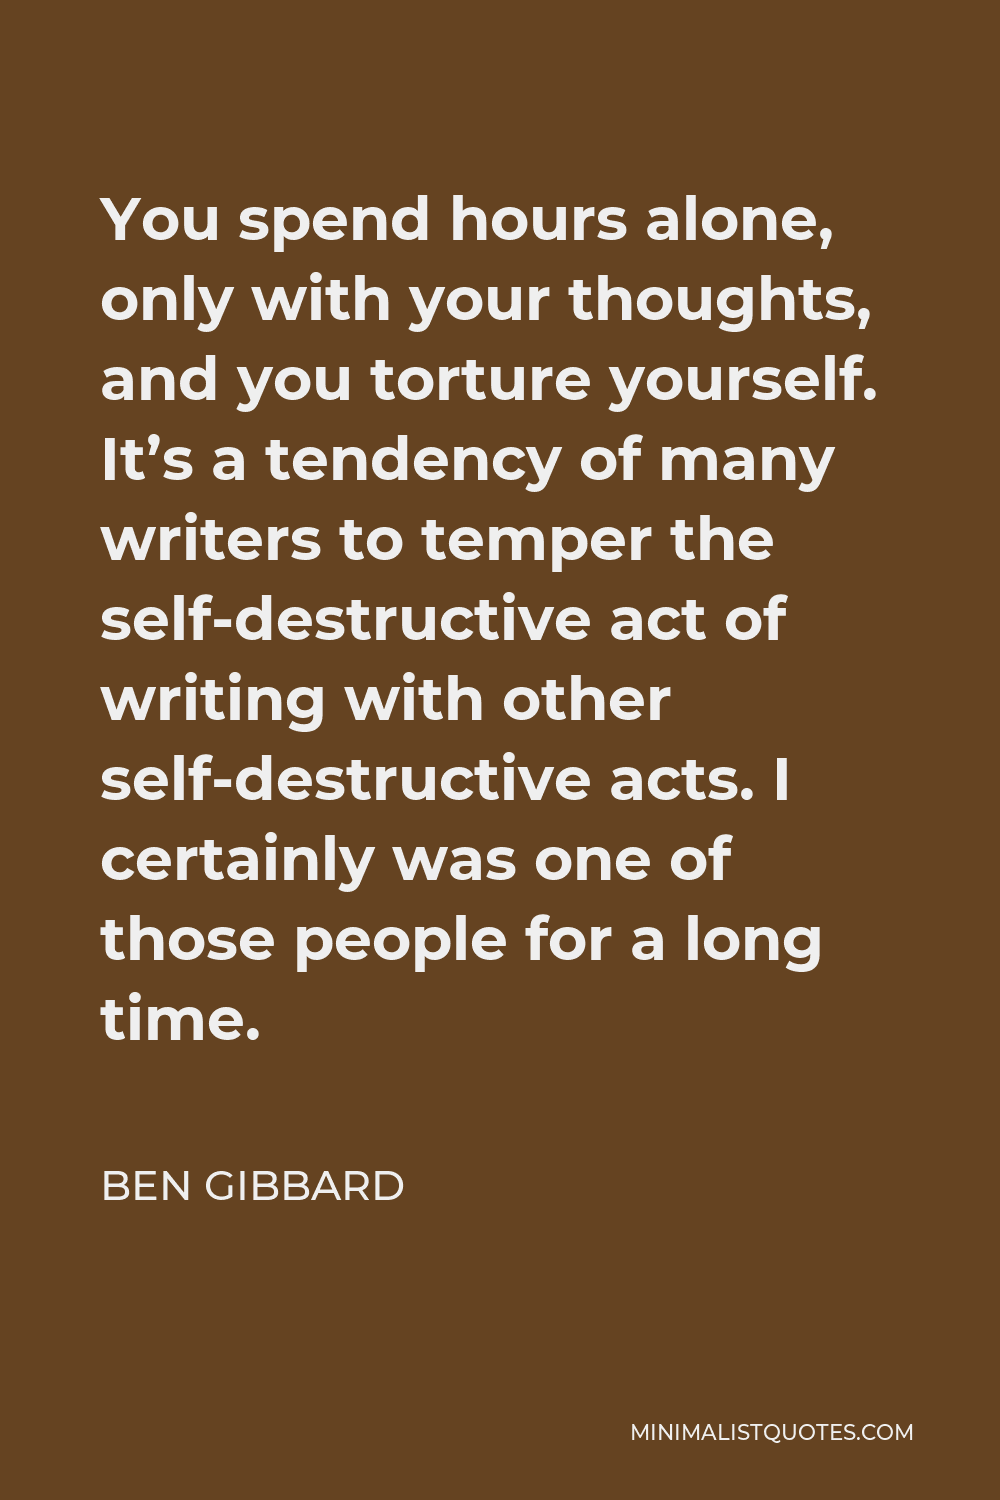 Ben Gibbard Quote - You spend hours alone, only with your thoughts, and you torture yourself. It’s a tendency of many writers to temper the self-destructive act of writing with other self-destructive acts. I certainly was one of those people for a long time.